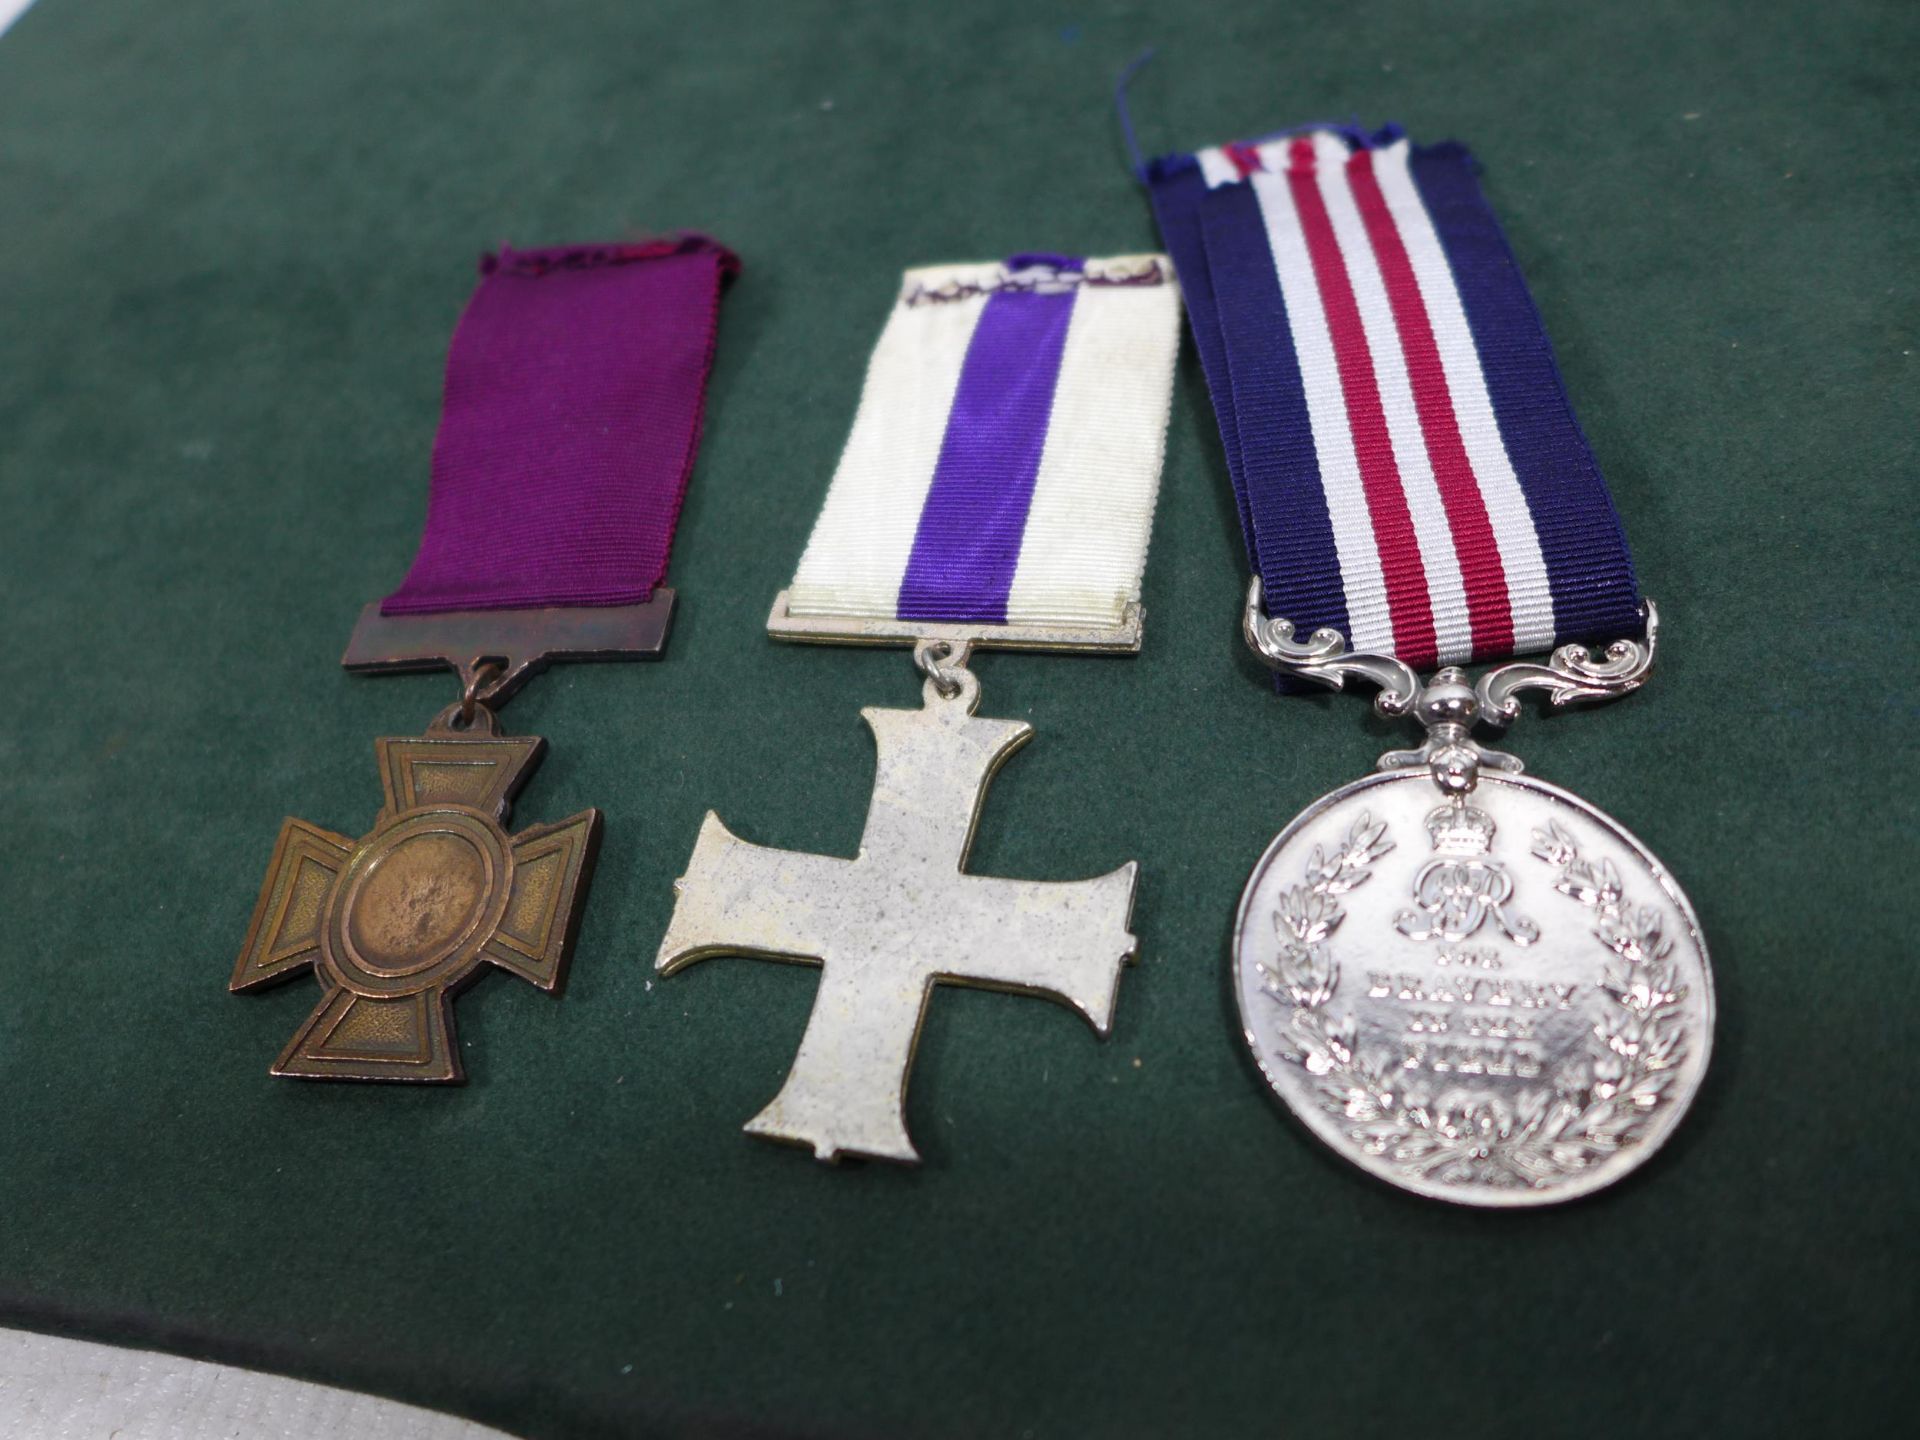 THREE REPLICA MEDALS, TO INCLUDE VICTORIA CROSS, MILITARY CROSS AND A MILITARY MEDAL - Image 2 of 2